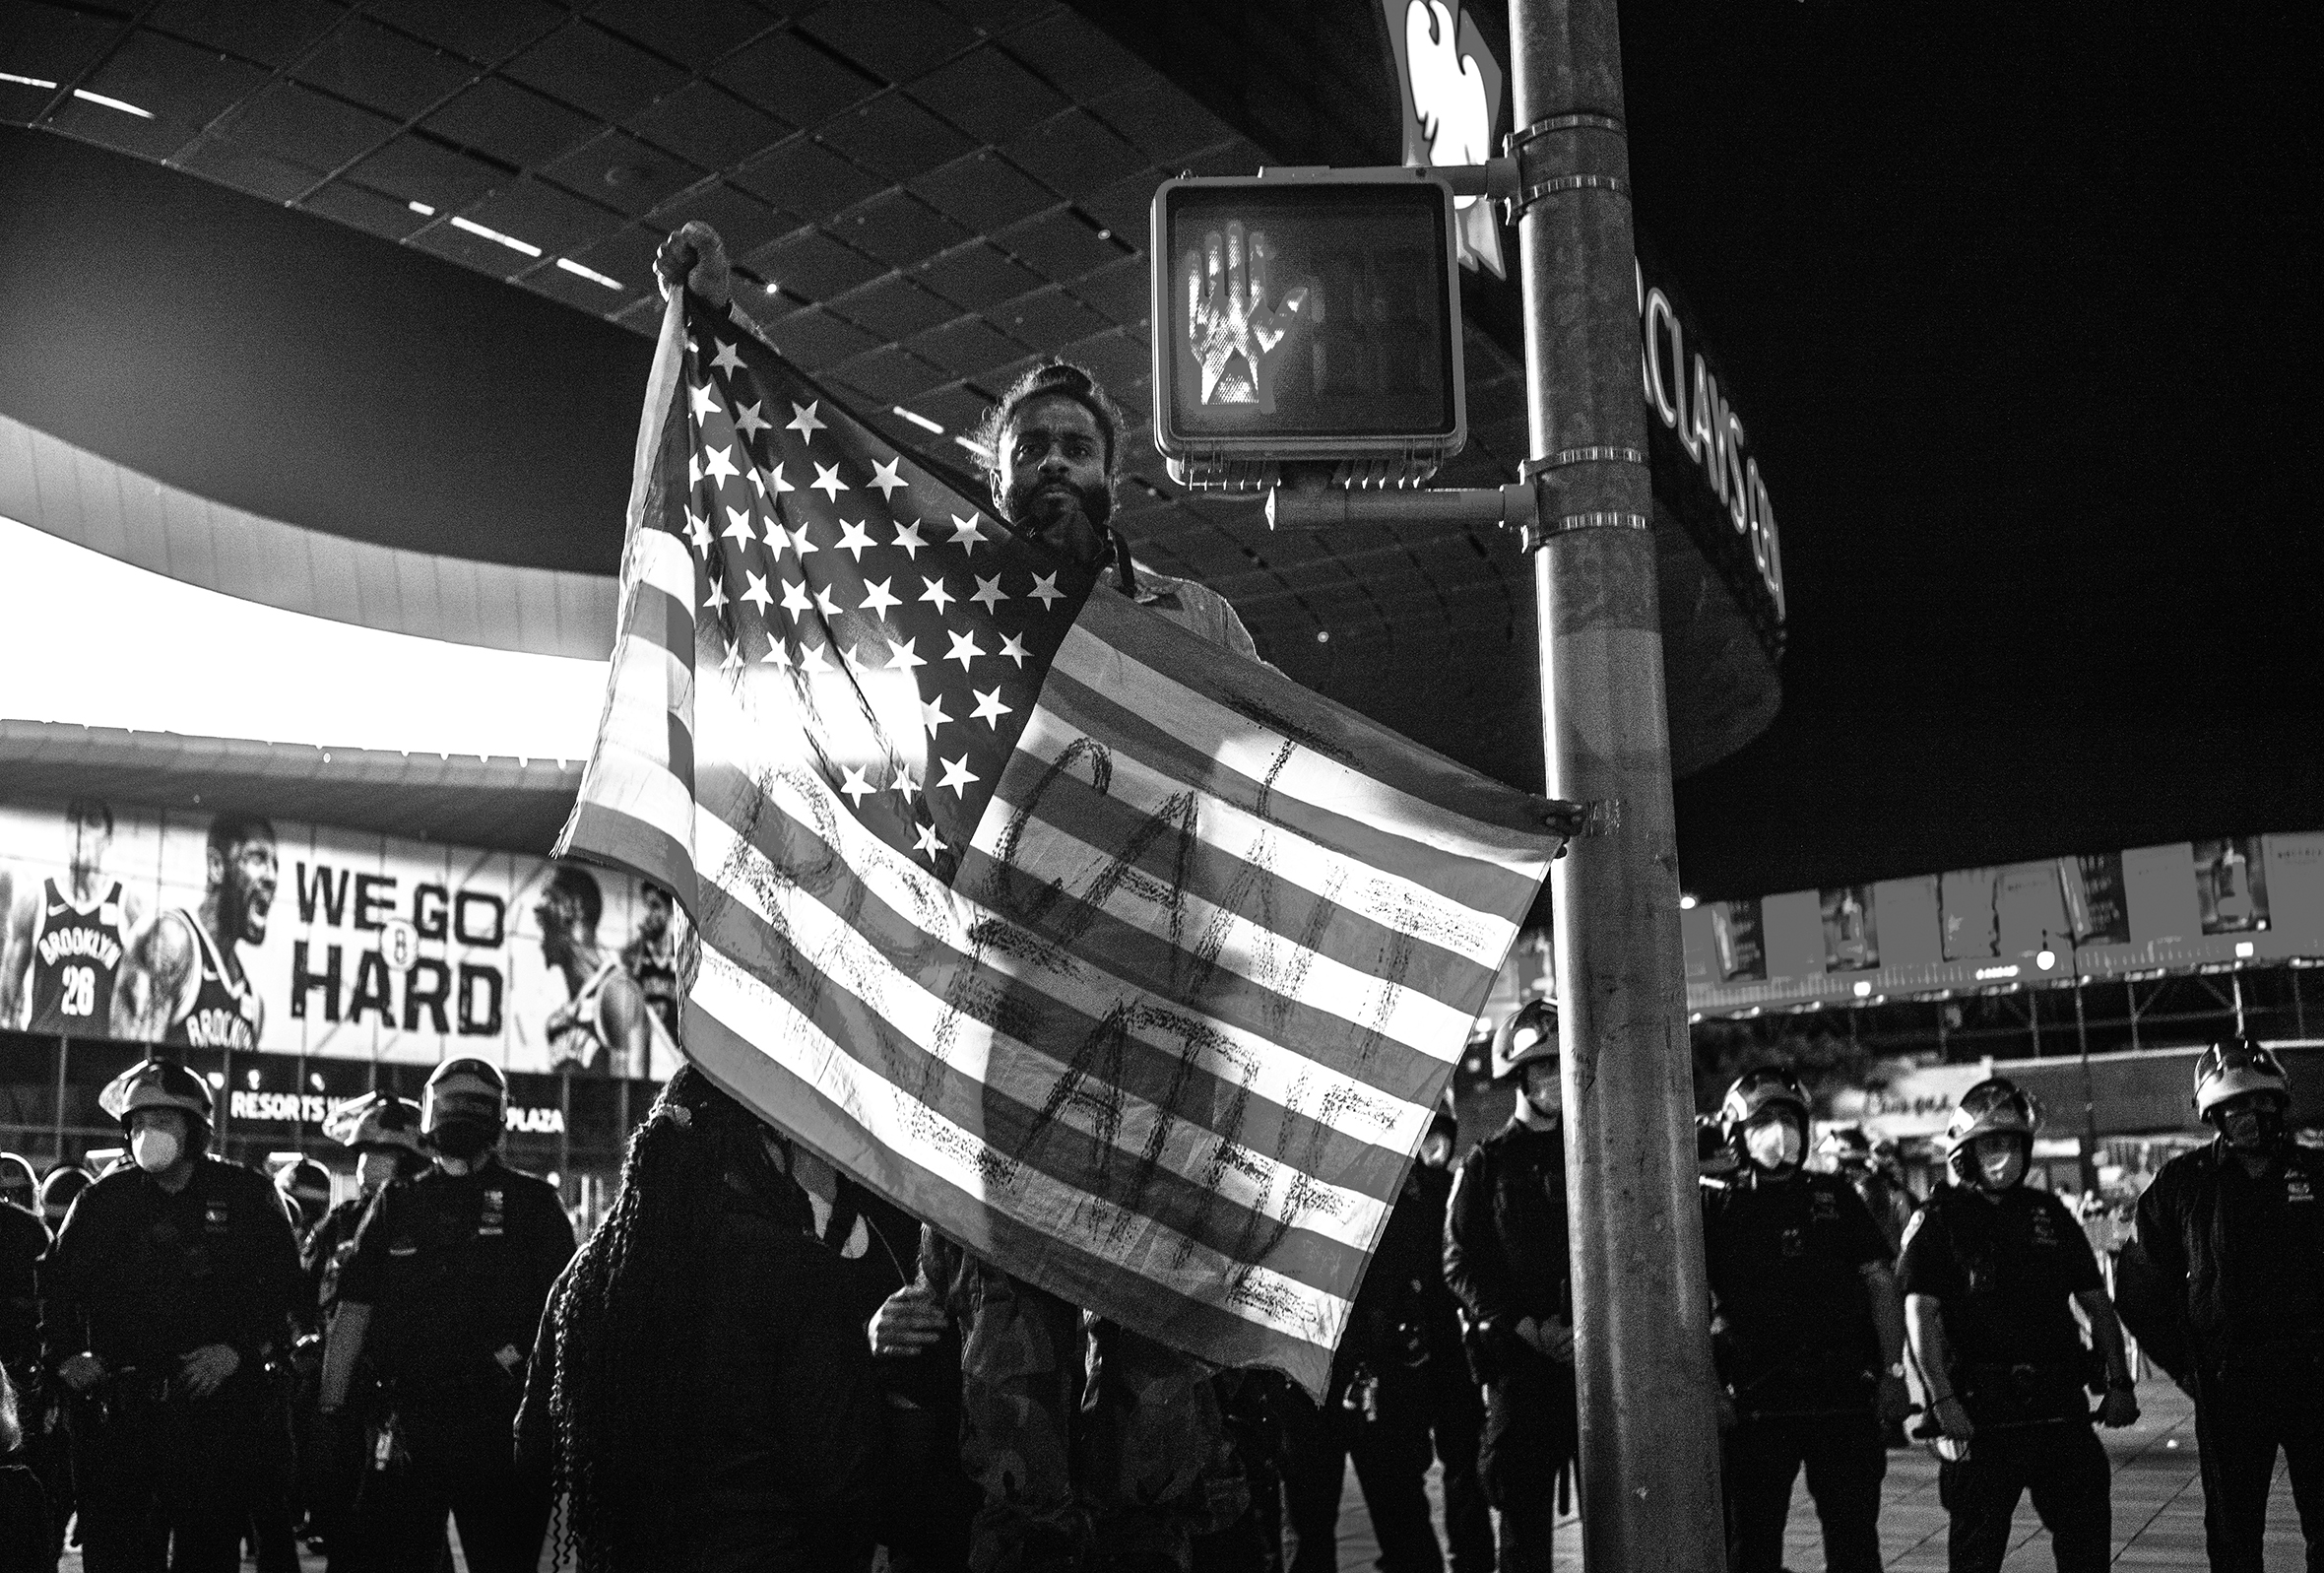 A demonstrator at a protest in New York City, in May 2020, is holding an American flag with “I can’t breathe” on it, at the same height as the crosswalk signal illuminating the do not walk hand icon. Behind the protestor is a large number of officers.